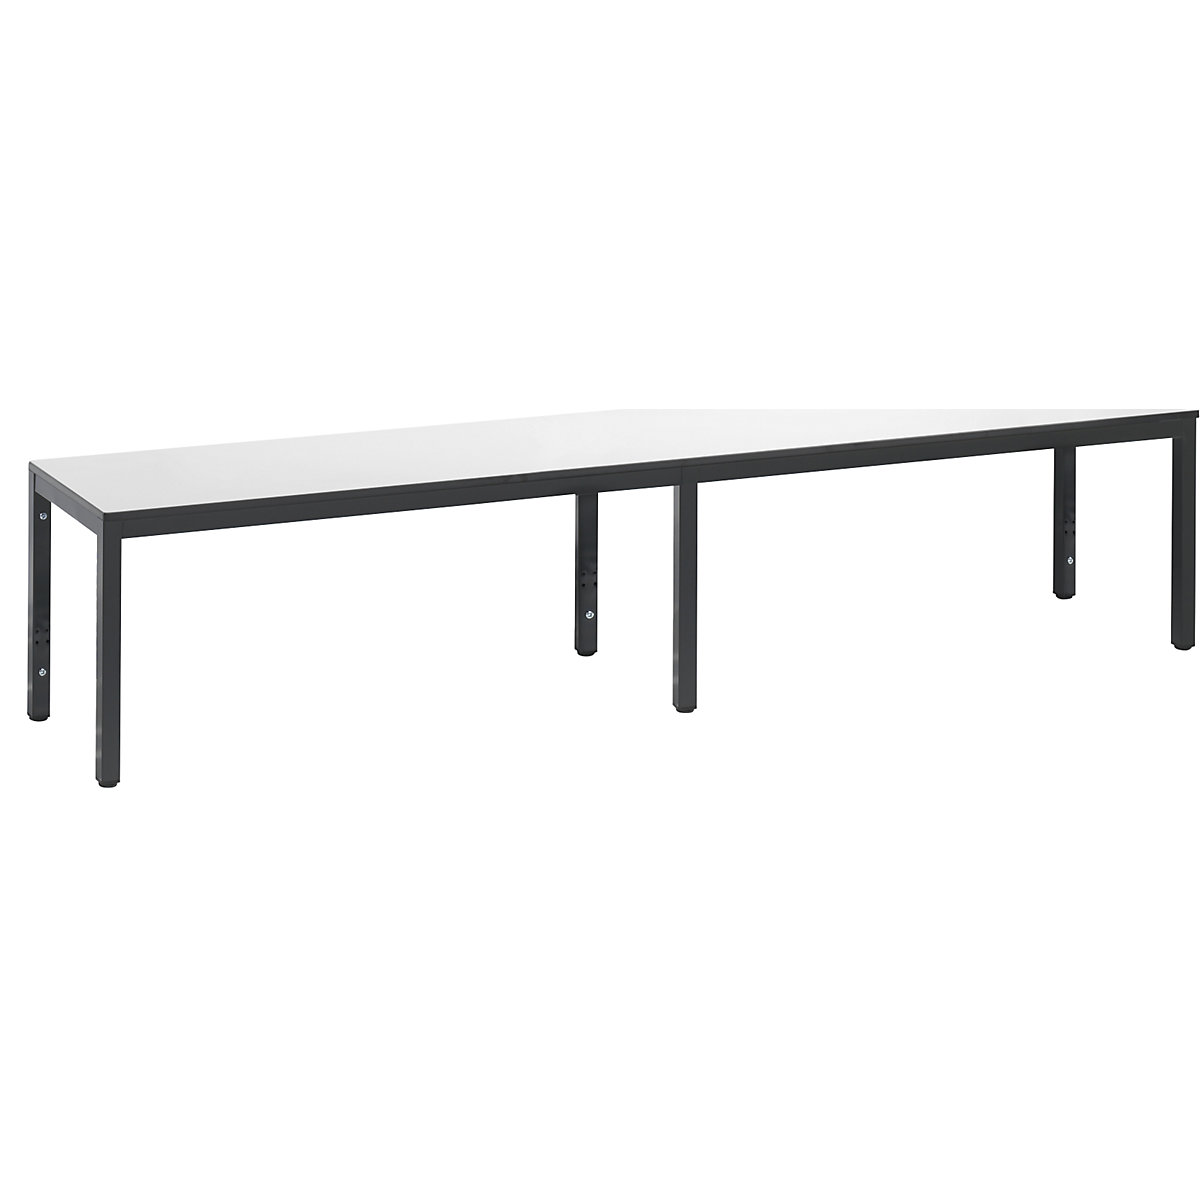 BASIC PLUS cloakroom bench – C+P, HPL seat surface, length 1960 mm, white-2